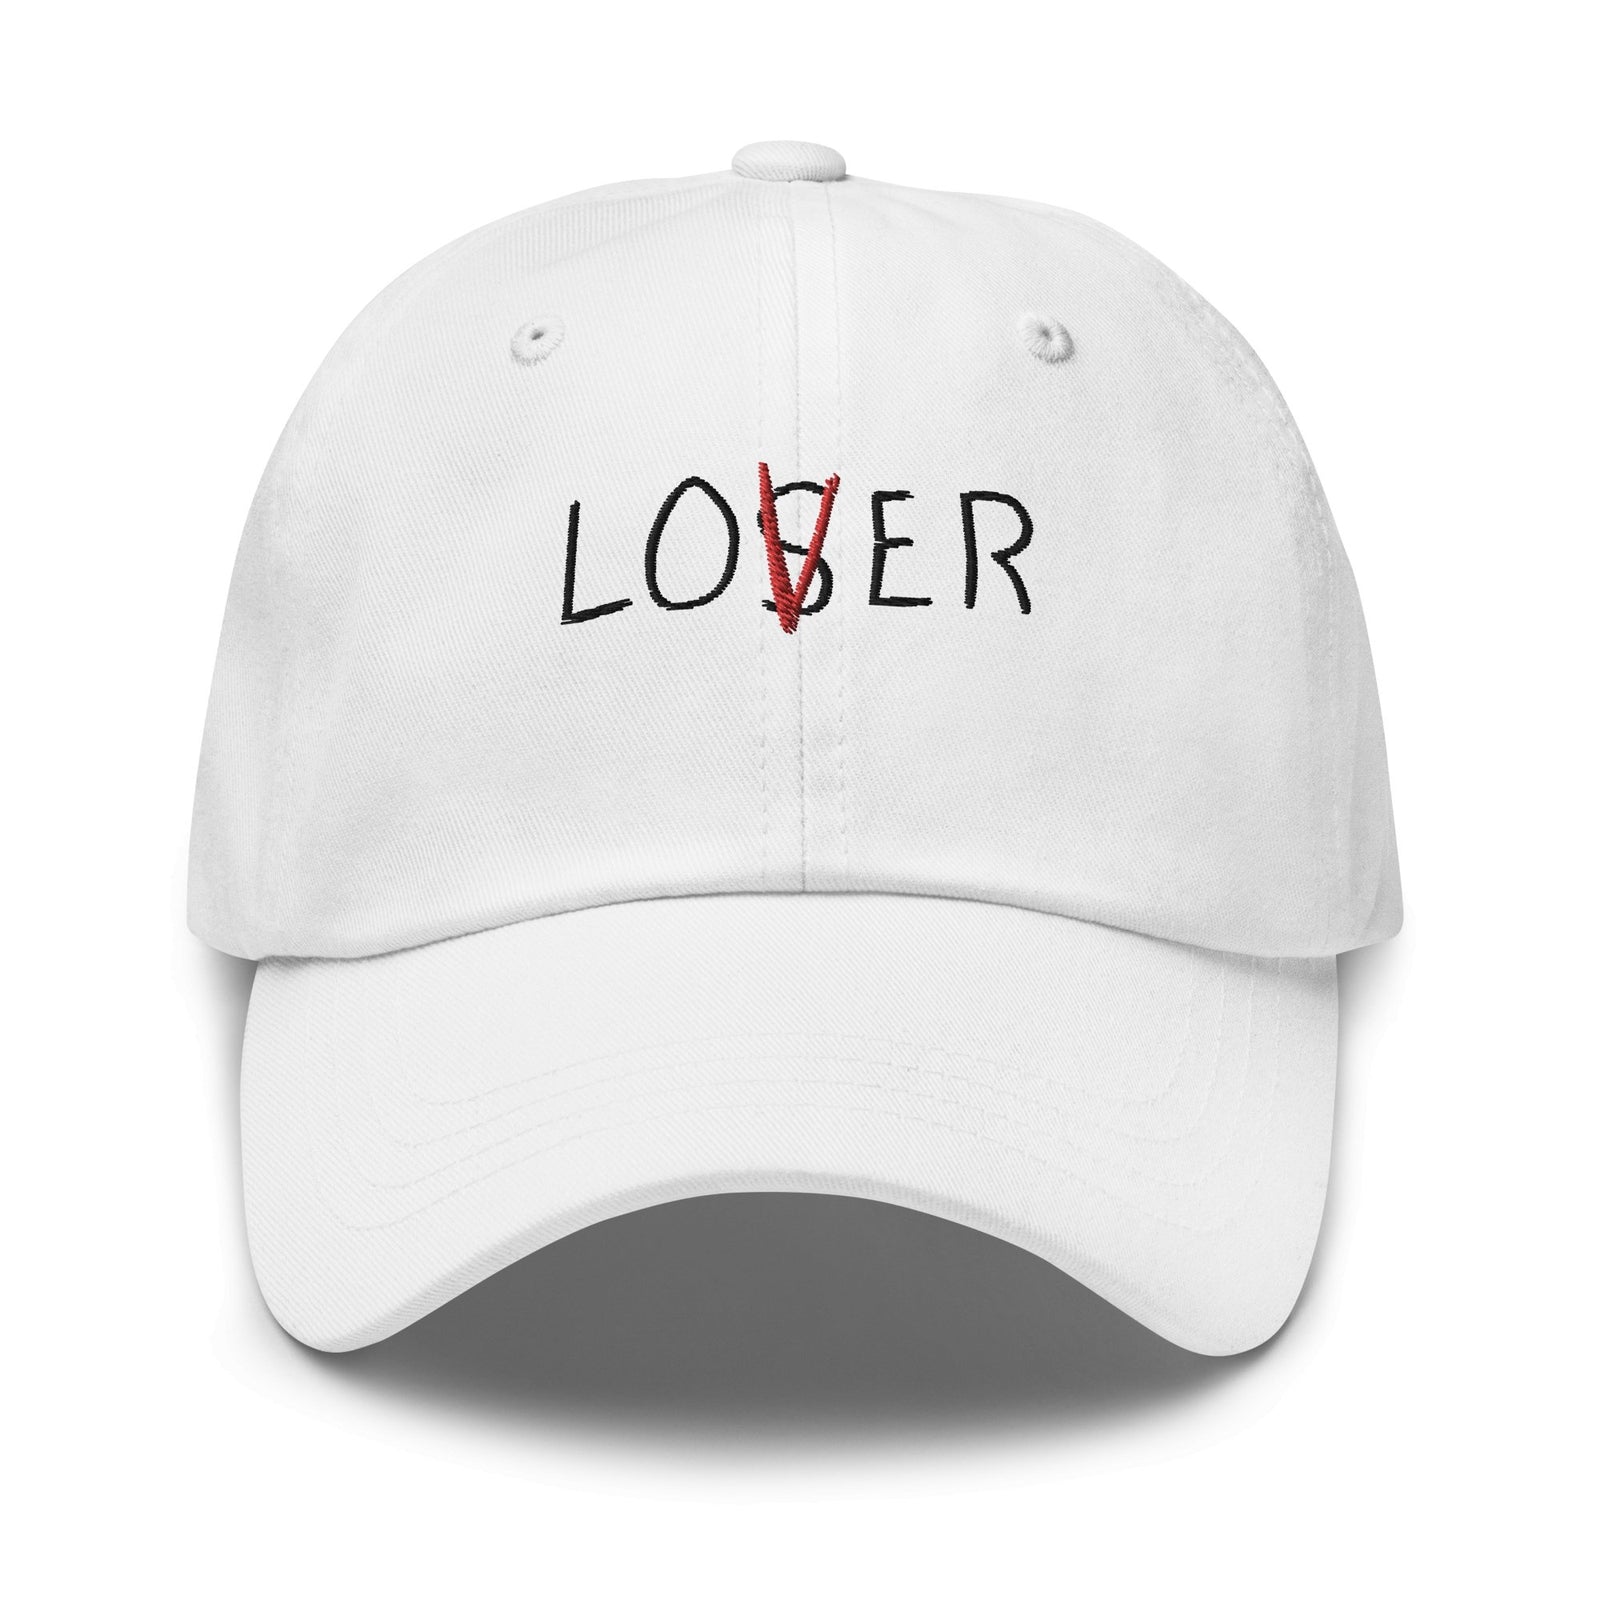 //cdn.shopify.com/s/files/1/0274/2488/2766/products/loser-lover-dad-hat-964107_5000x.jpg?v=1652379171 5000w,
    //cdn.shopify.com/s/files/1/0274/2488/2766/products/loser-lover-dad-hat-964107_4500x.jpg?v=1652379171 4500w,
    //cdn.shopify.com/s/files/1/0274/2488/2766/products/loser-lover-dad-hat-964107_4000x.jpg?v=1652379171 4000w,
    //cdn.shopify.com/s/files/1/0274/2488/2766/products/loser-lover-dad-hat-964107_3500x.jpg?v=1652379171 3500w,
    //cdn.shopify.com/s/files/1/0274/2488/2766/products/loser-lover-dad-hat-964107_3000x.jpg?v=1652379171 3000w,
    //cdn.shopify.com/s/files/1/0274/2488/2766/products/loser-lover-dad-hat-964107_2500x.jpg?v=1652379171 2500w,
    //cdn.shopify.com/s/files/1/0274/2488/2766/products/loser-lover-dad-hat-964107_2000x.jpg?v=1652379171 2000w,
    //cdn.shopify.com/s/files/1/0274/2488/2766/products/loser-lover-dad-hat-964107_1800x.jpg?v=1652379171 1800w,
    //cdn.shopify.com/s/files/1/0274/2488/2766/products/loser-lover-dad-hat-964107_1600x.jpg?v=1652379171 1600w,
    //cdn.shopify.com/s/files/1/0274/2488/2766/products/loser-lover-dad-hat-964107_1400x.jpg?v=1652379171 1400w,
    //cdn.shopify.com/s/files/1/0274/2488/2766/products/loser-lover-dad-hat-964107_1200x.jpg?v=1652379171 1200w,
    //cdn.shopify.com/s/files/1/0274/2488/2766/products/loser-lover-dad-hat-964107_1000x.jpg?v=1652379171 1000w,
    //cdn.shopify.com/s/files/1/0274/2488/2766/products/loser-lover-dad-hat-964107_800x.jpg?v=1652379171 800w,
    //cdn.shopify.com/s/files/1/0274/2488/2766/products/loser-lover-dad-hat-964107_600x.jpg?v=1652379171 600w,
    //cdn.shopify.com/s/files/1/0274/2488/2766/products/loser-lover-dad-hat-964107_400x.jpg?v=1652379171 400w,
    //cdn.shopify.com/s/files/1/0274/2488/2766/products/loser-lover-dad-hat-964107_200x.jpg?v=1652379171 200w